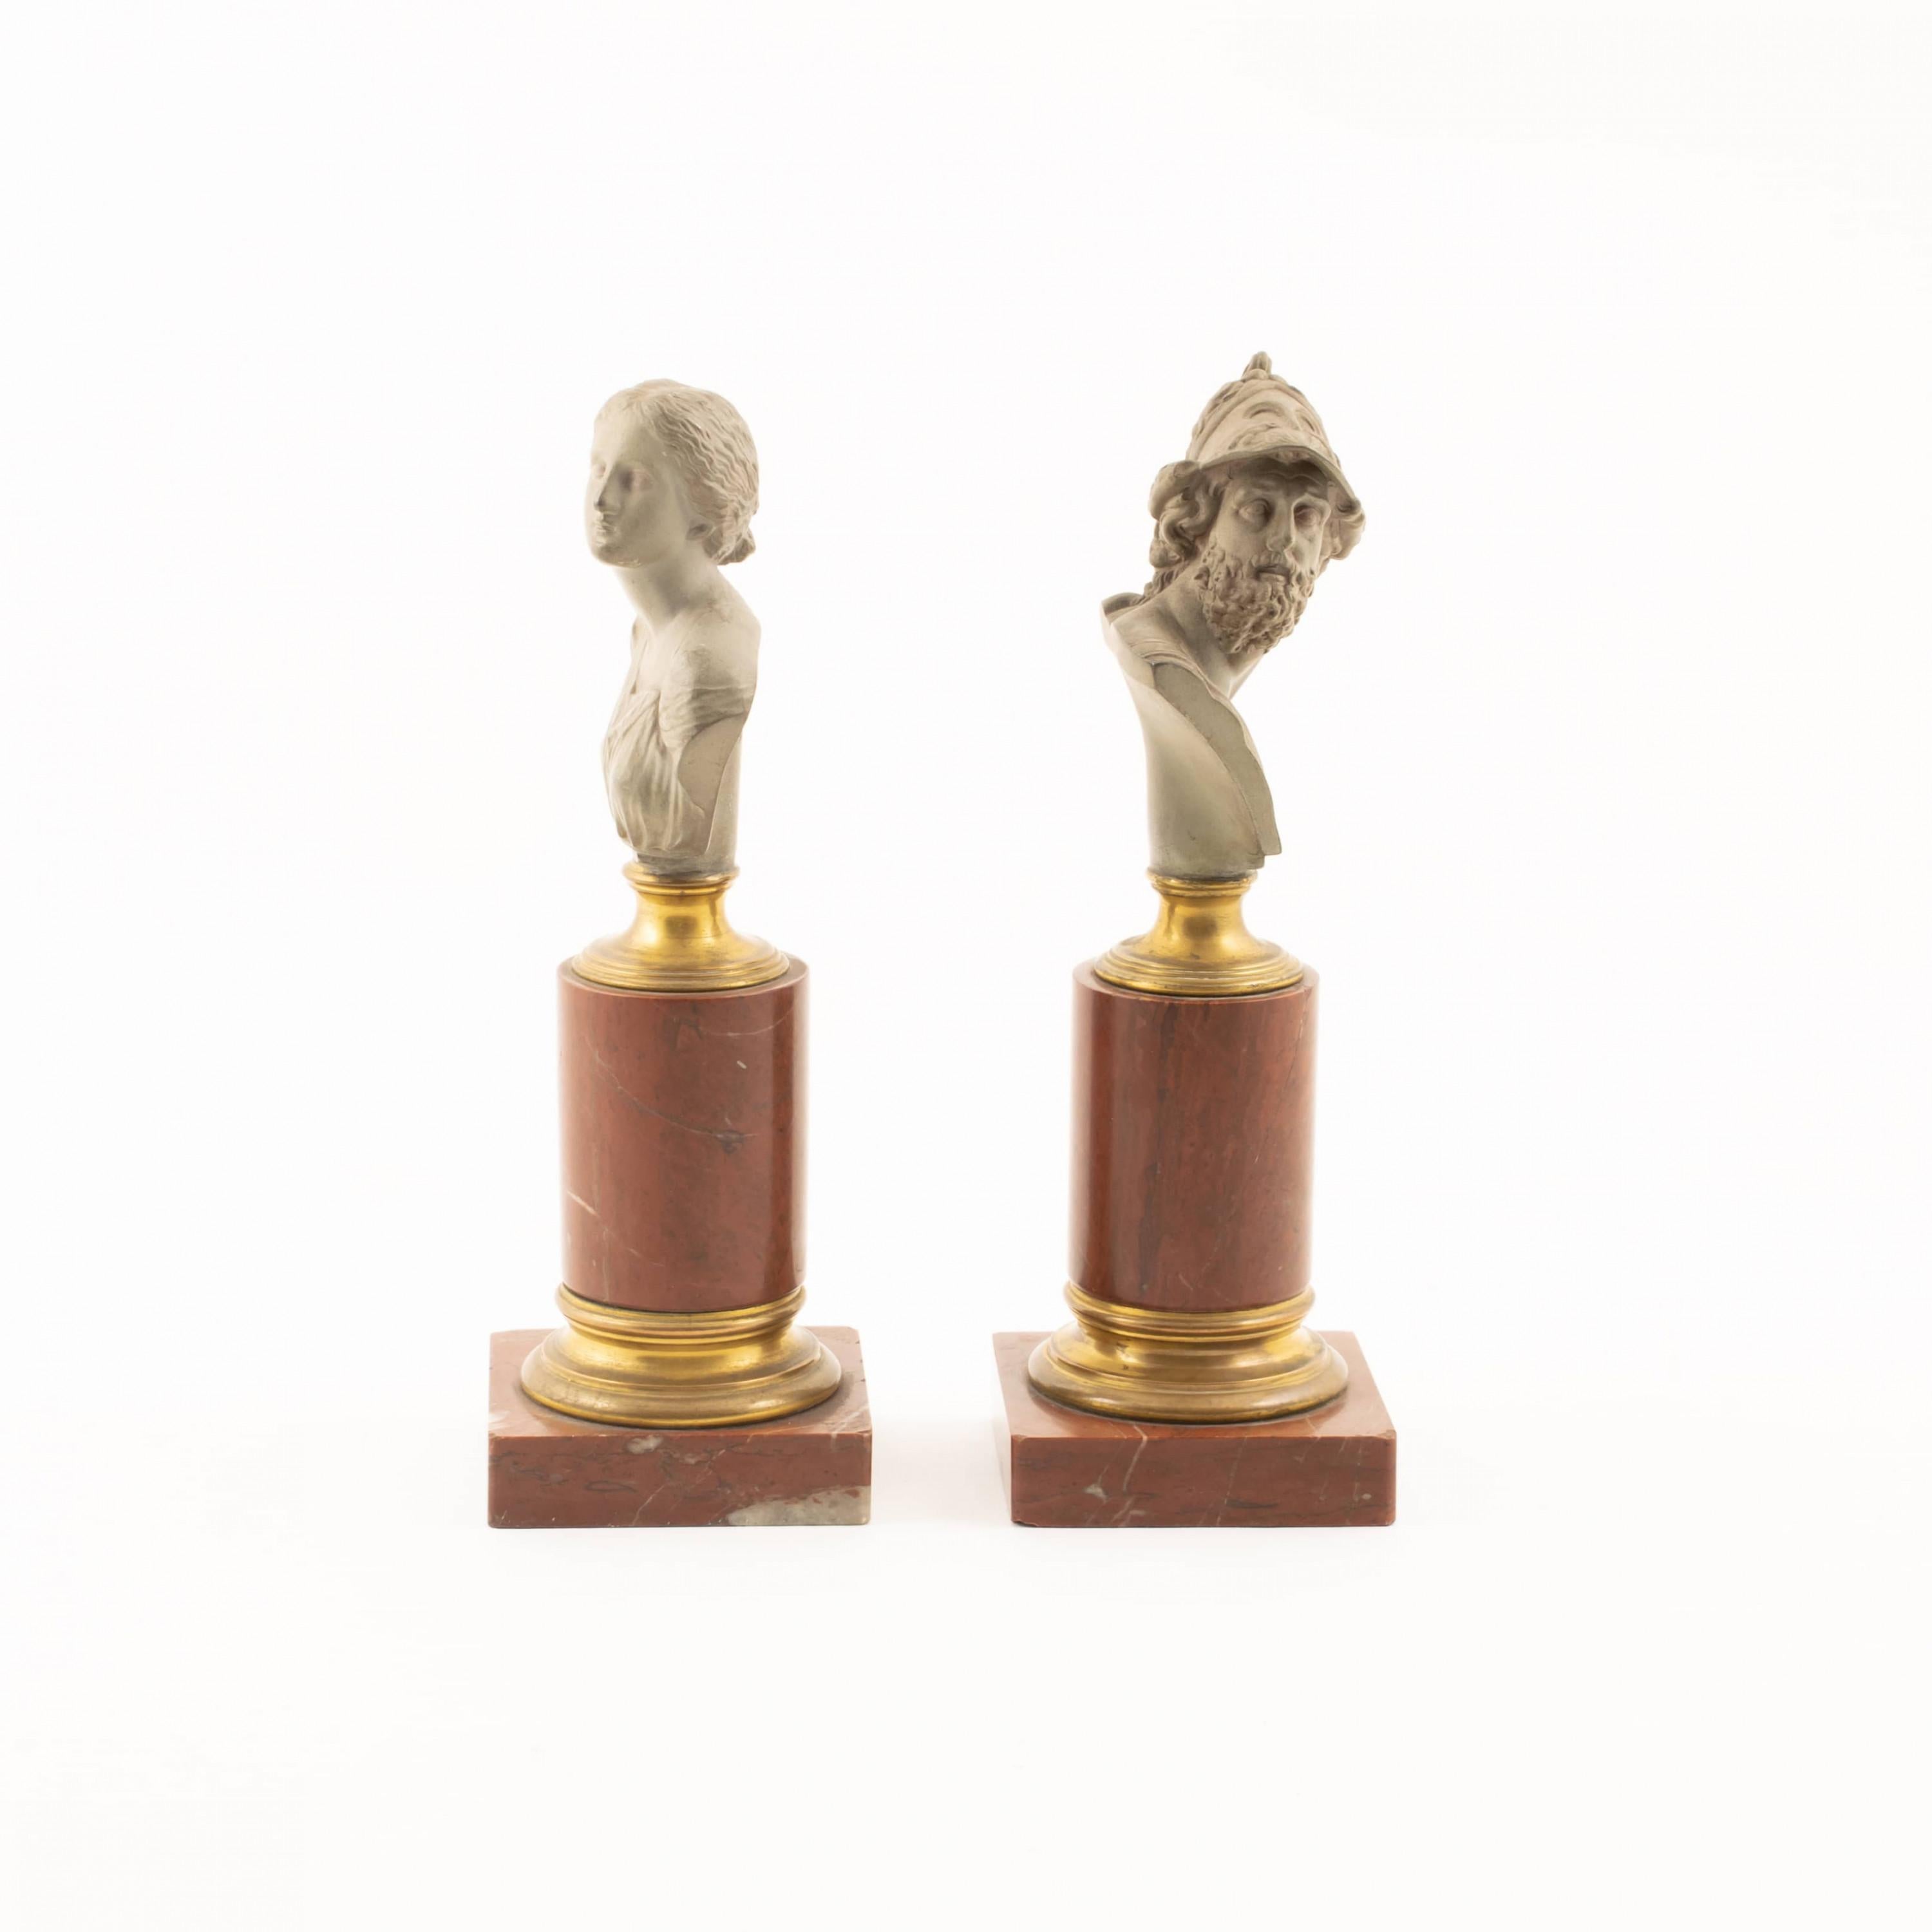 A pair of classical Greek figure busts, 21 cm high.
King Menelaus of Sparta and his wife Helena.
Cast metal on bronze columns gilt in reddish marble.

Made at H. Gladenbeck & Sohn 1860s, art foundry in Berlin 1851 - 1926.
Especially known for